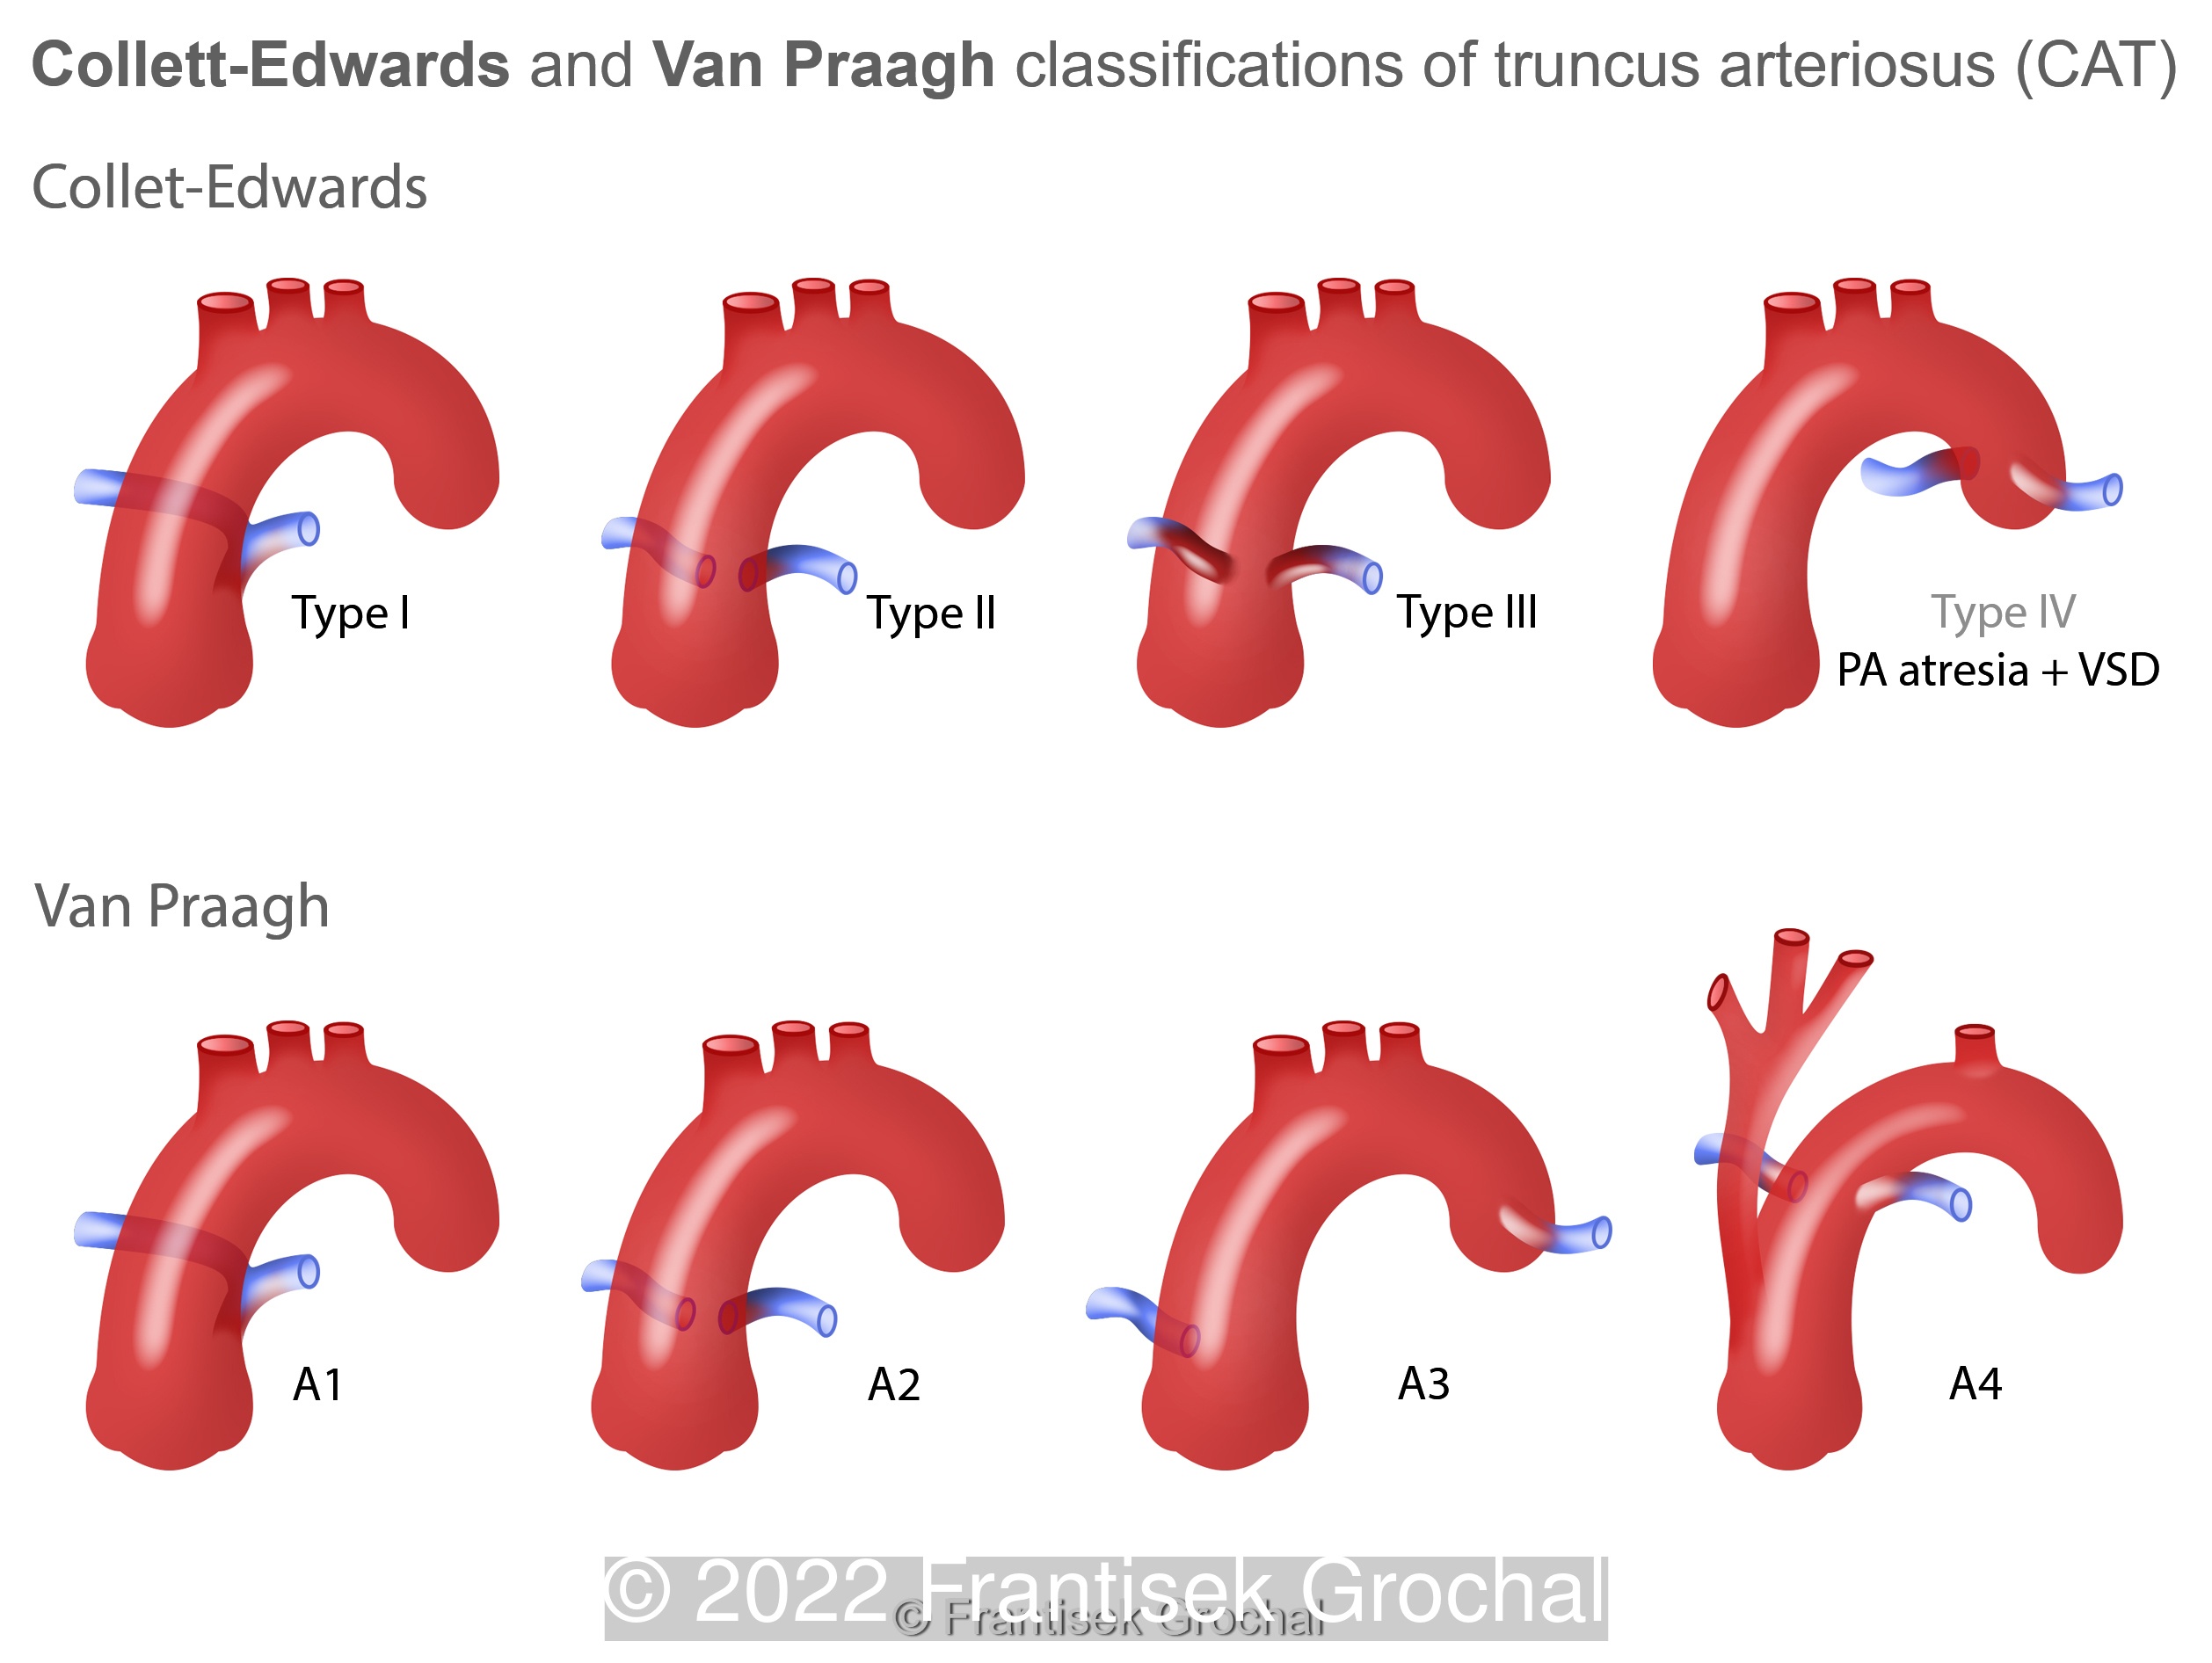 Classification systems of Common Arterial Trunk